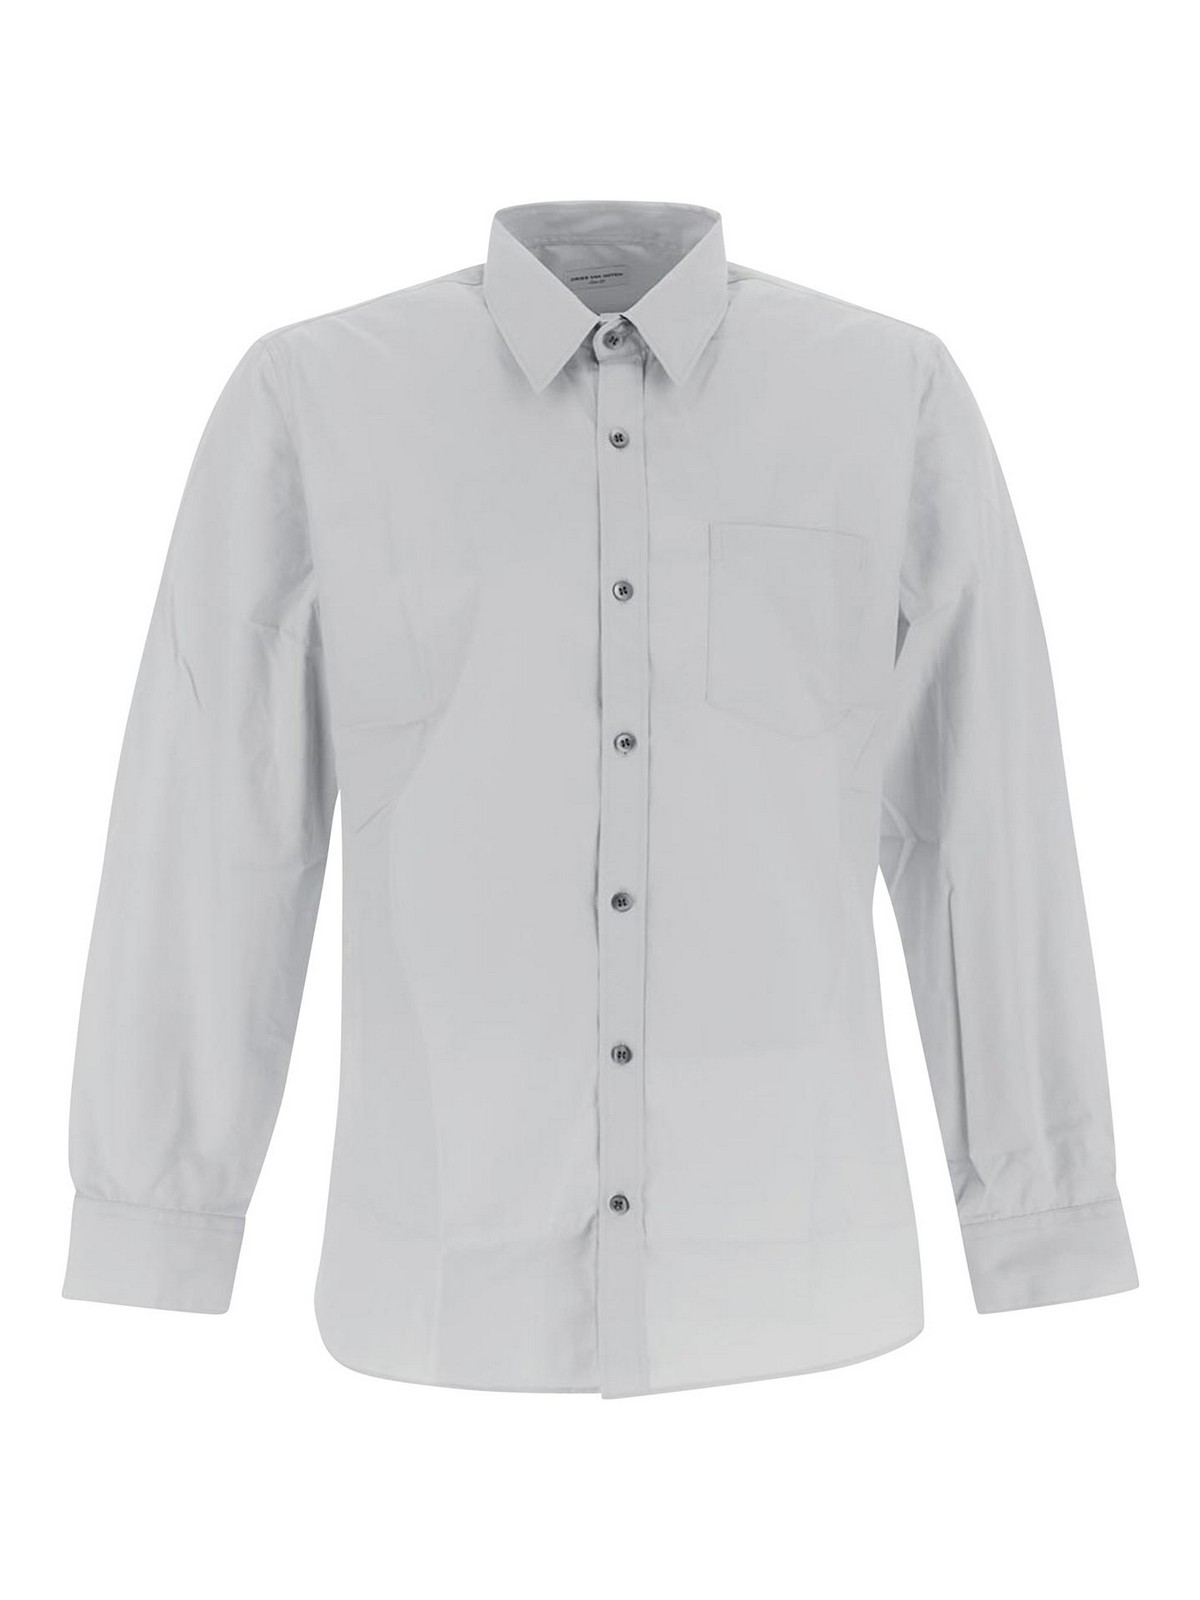 DRIES VAN NOTEN SHIRT IN WHITE WITH POINTED COLLAR